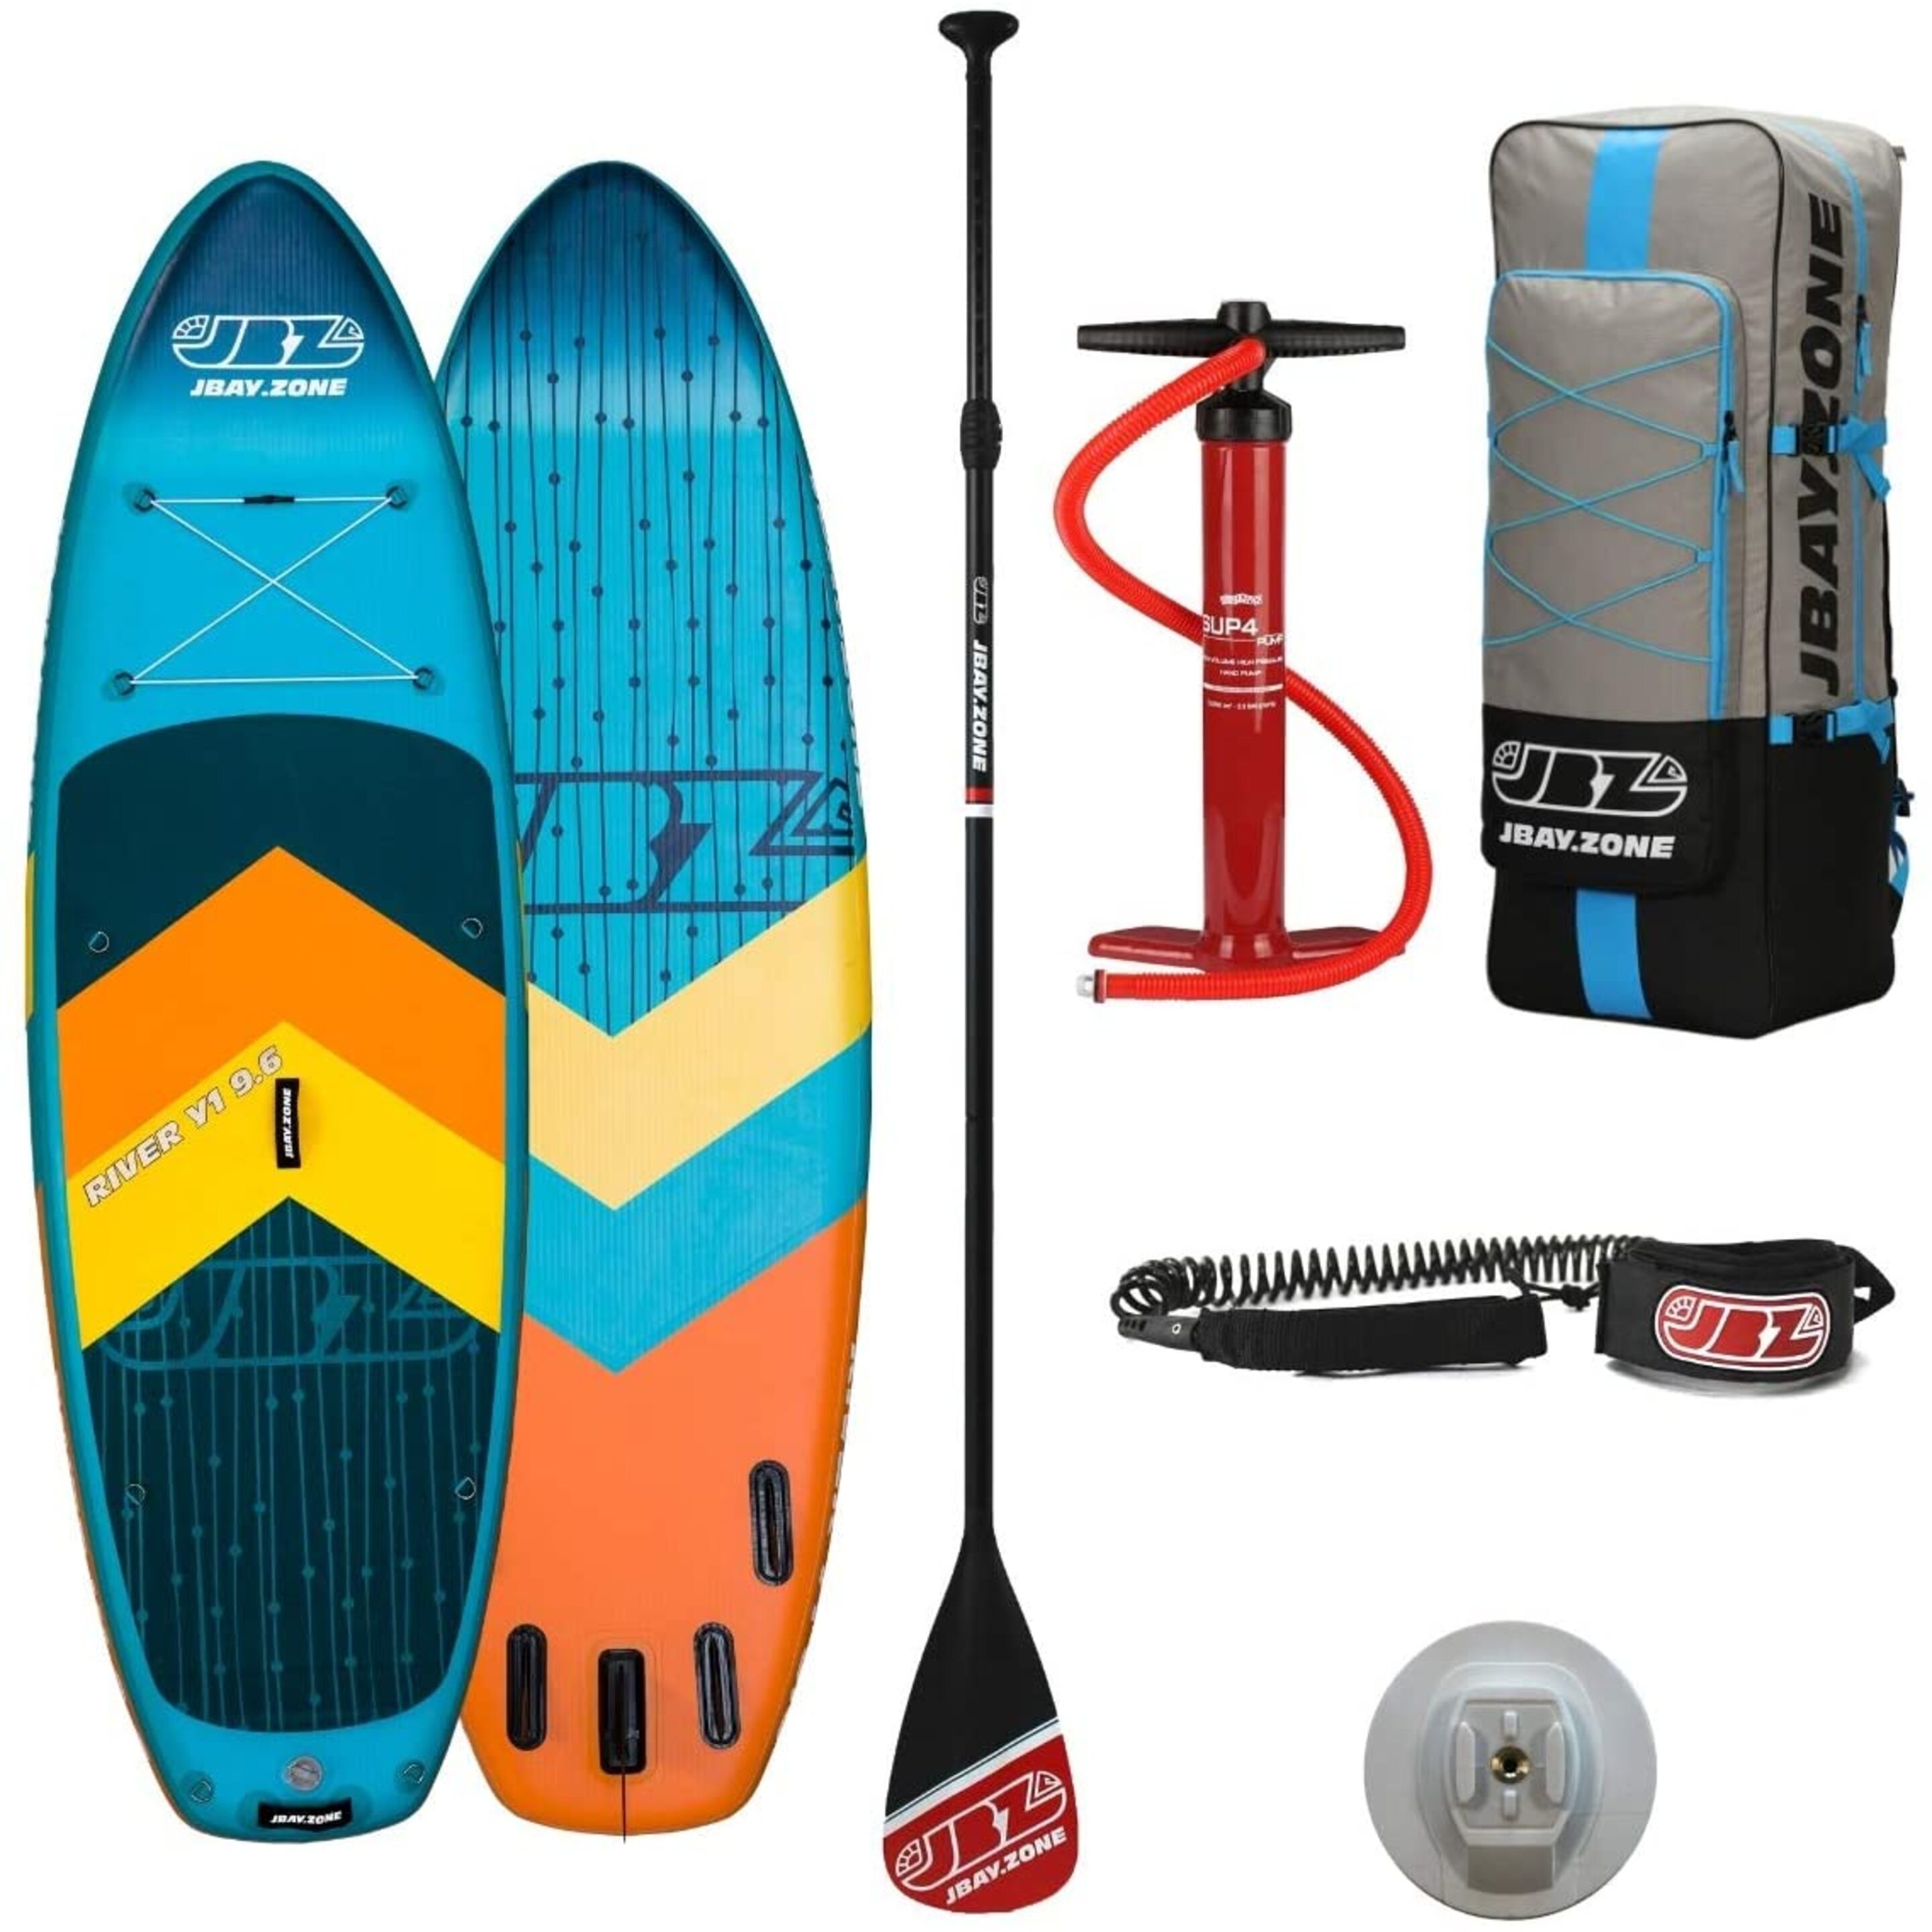 Tabla De Stand Up Paddle Surf Hinchable Jbay.zone Sup River Y1  Whitewater Sup - Amarillo/Verde  MKP